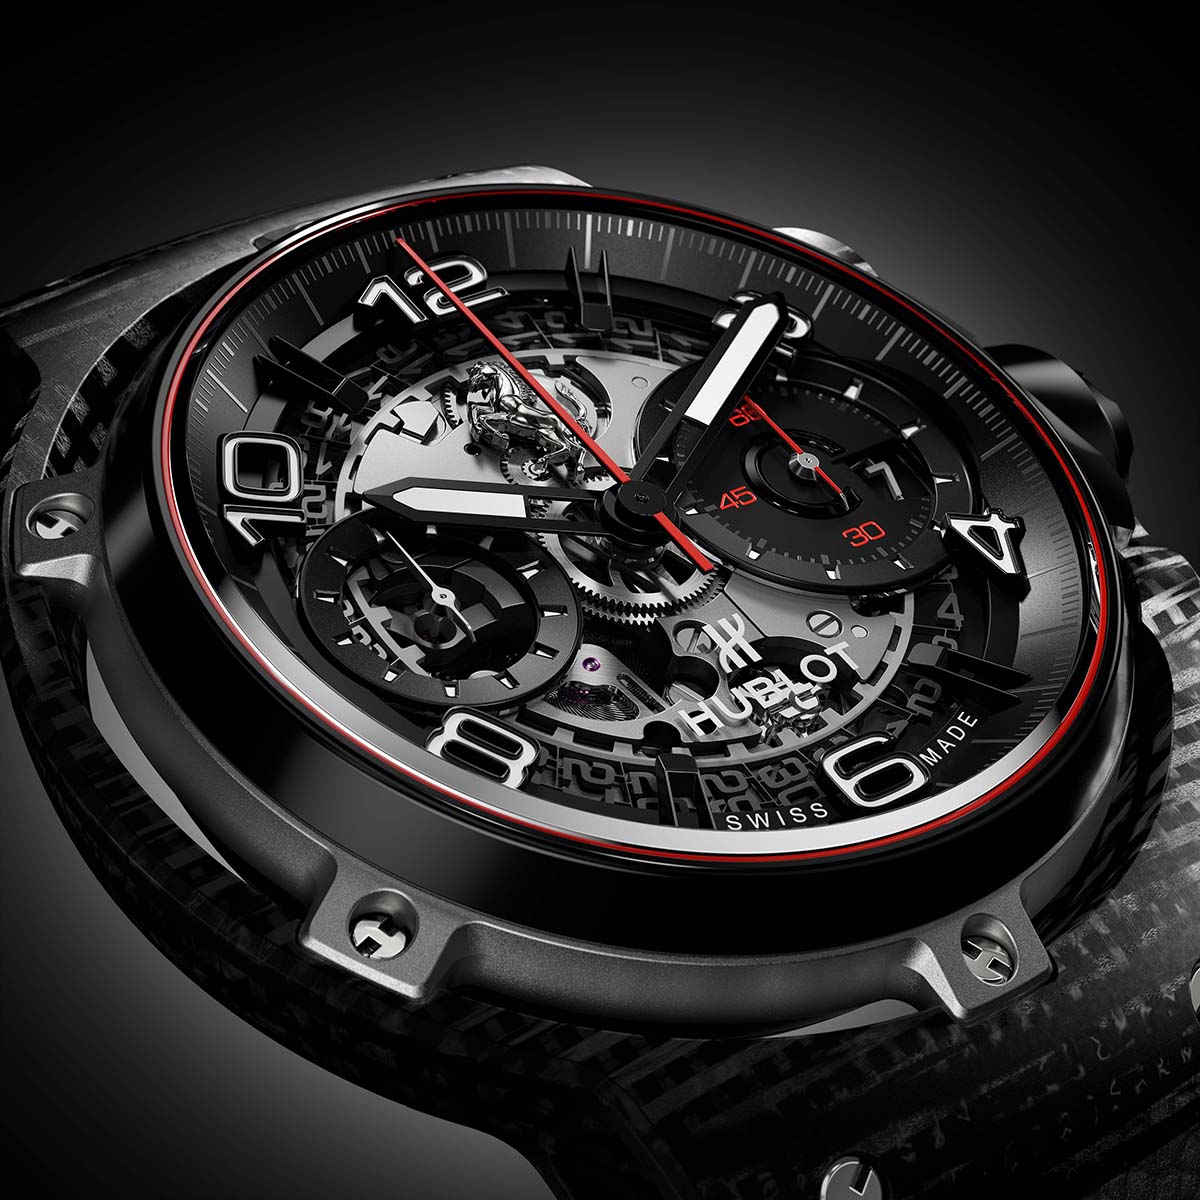 Detail shot of a sports watch with black and red watch face